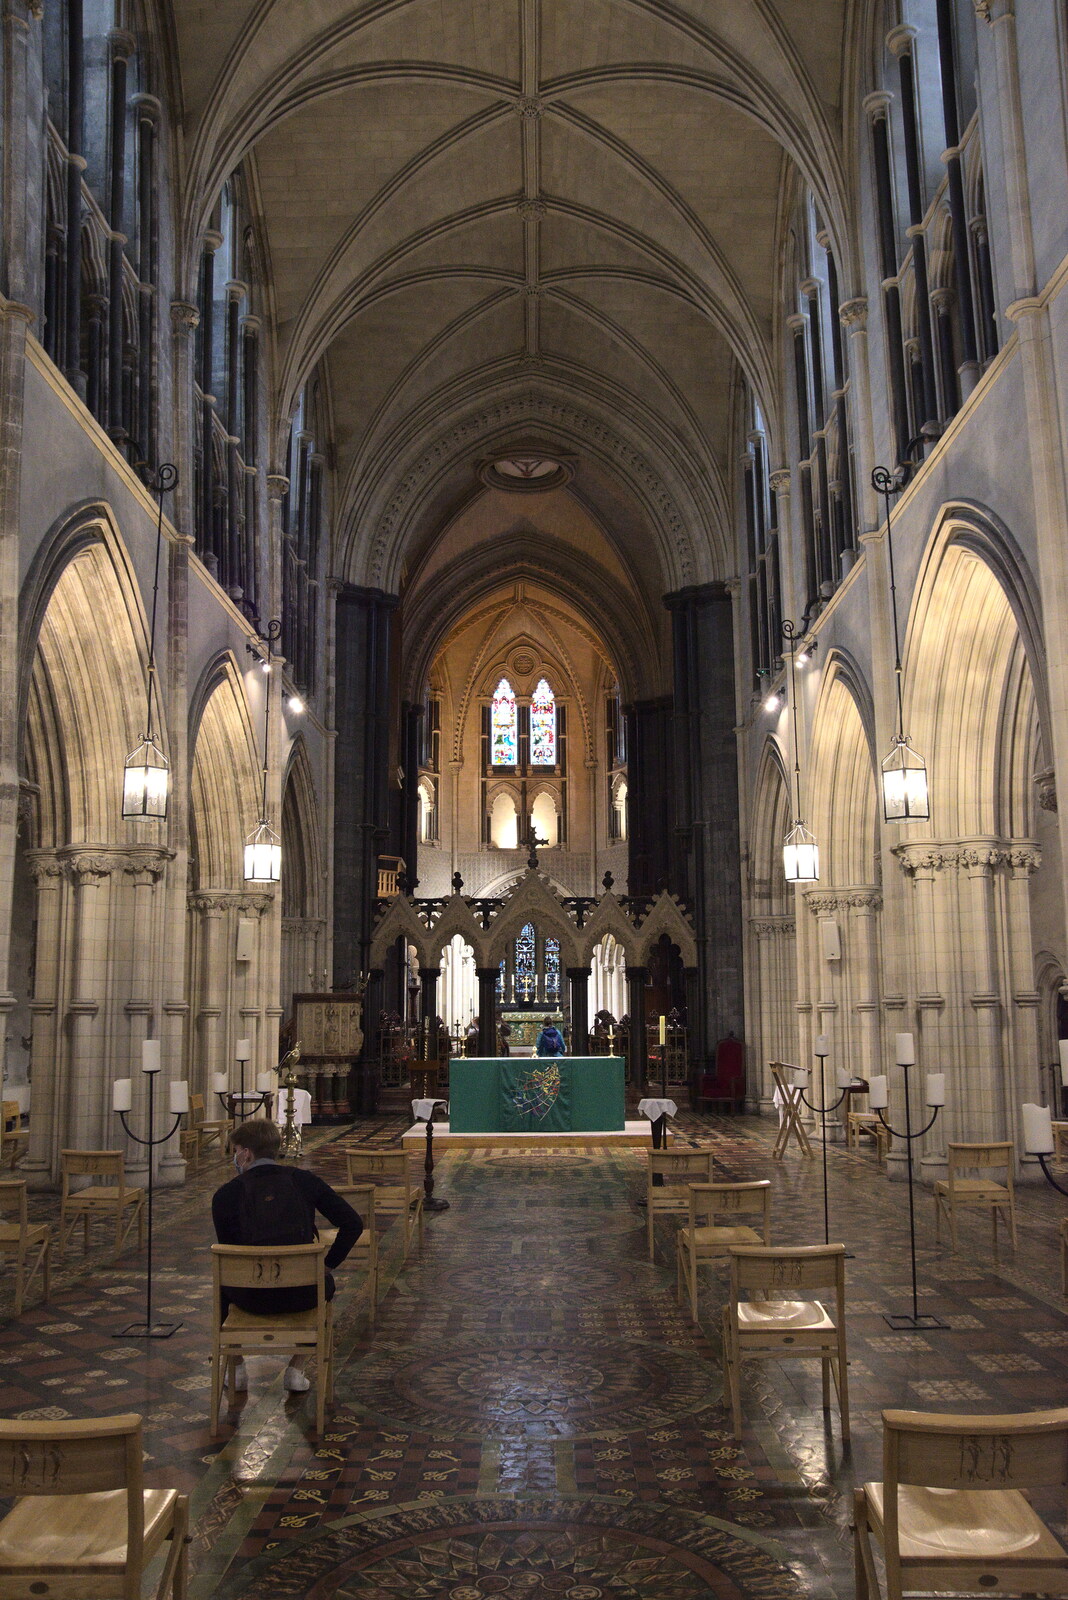 The nave of St Patrick's Cathedral from A Trip to Noddy's, and Dublin City Centre, Wicklow and Dublin, Ireland - 16th August 2021